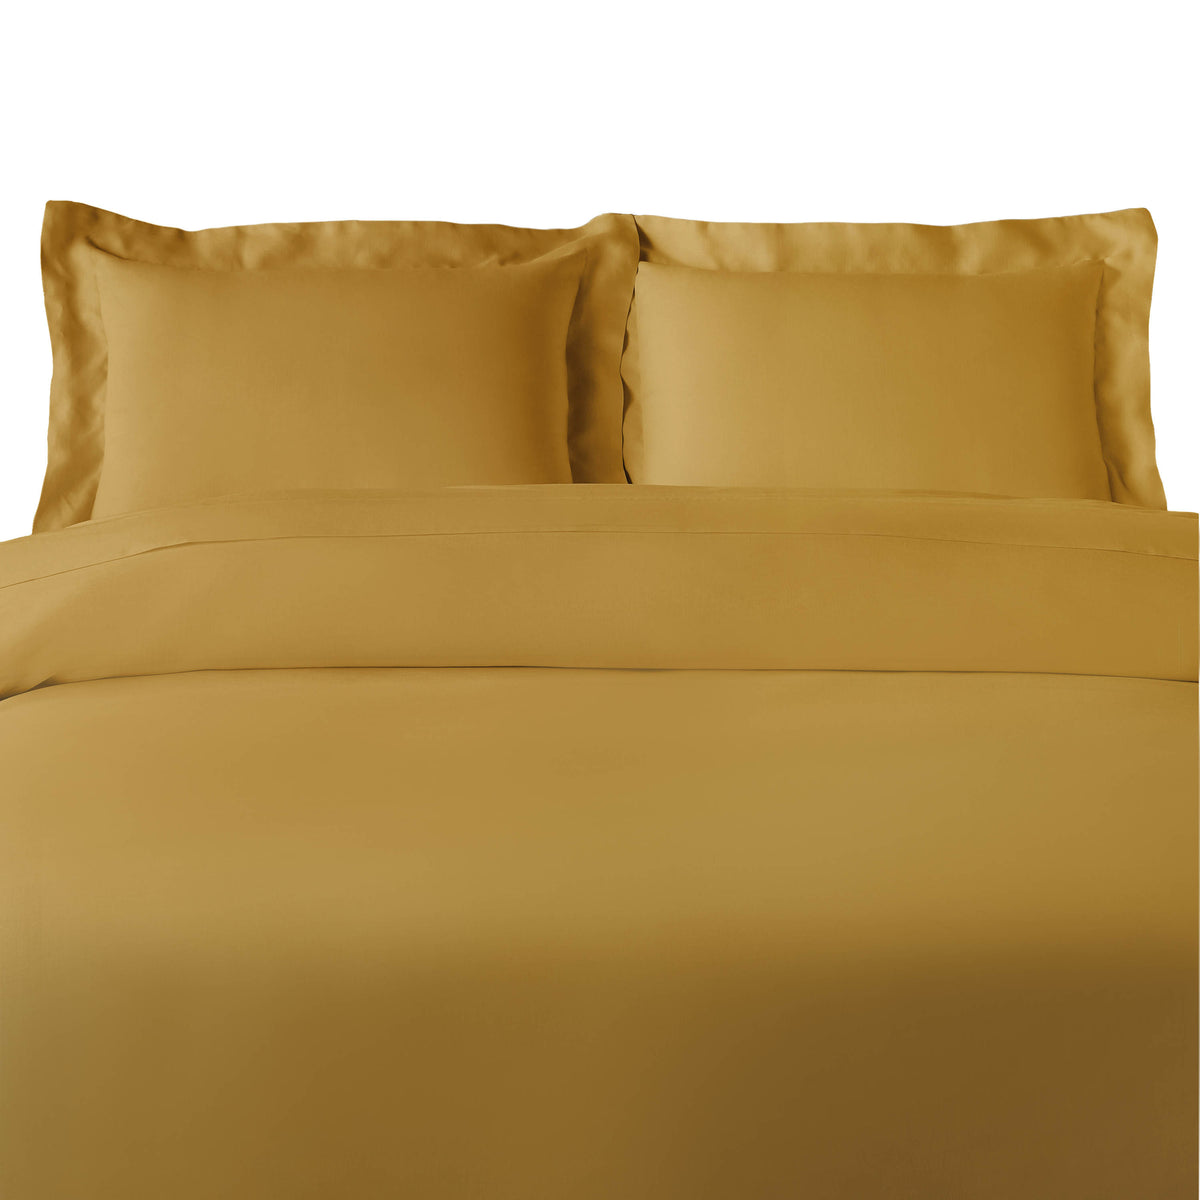 100% Rayon From Bamboo 300 Thread Count Solid Duvet Cover Set